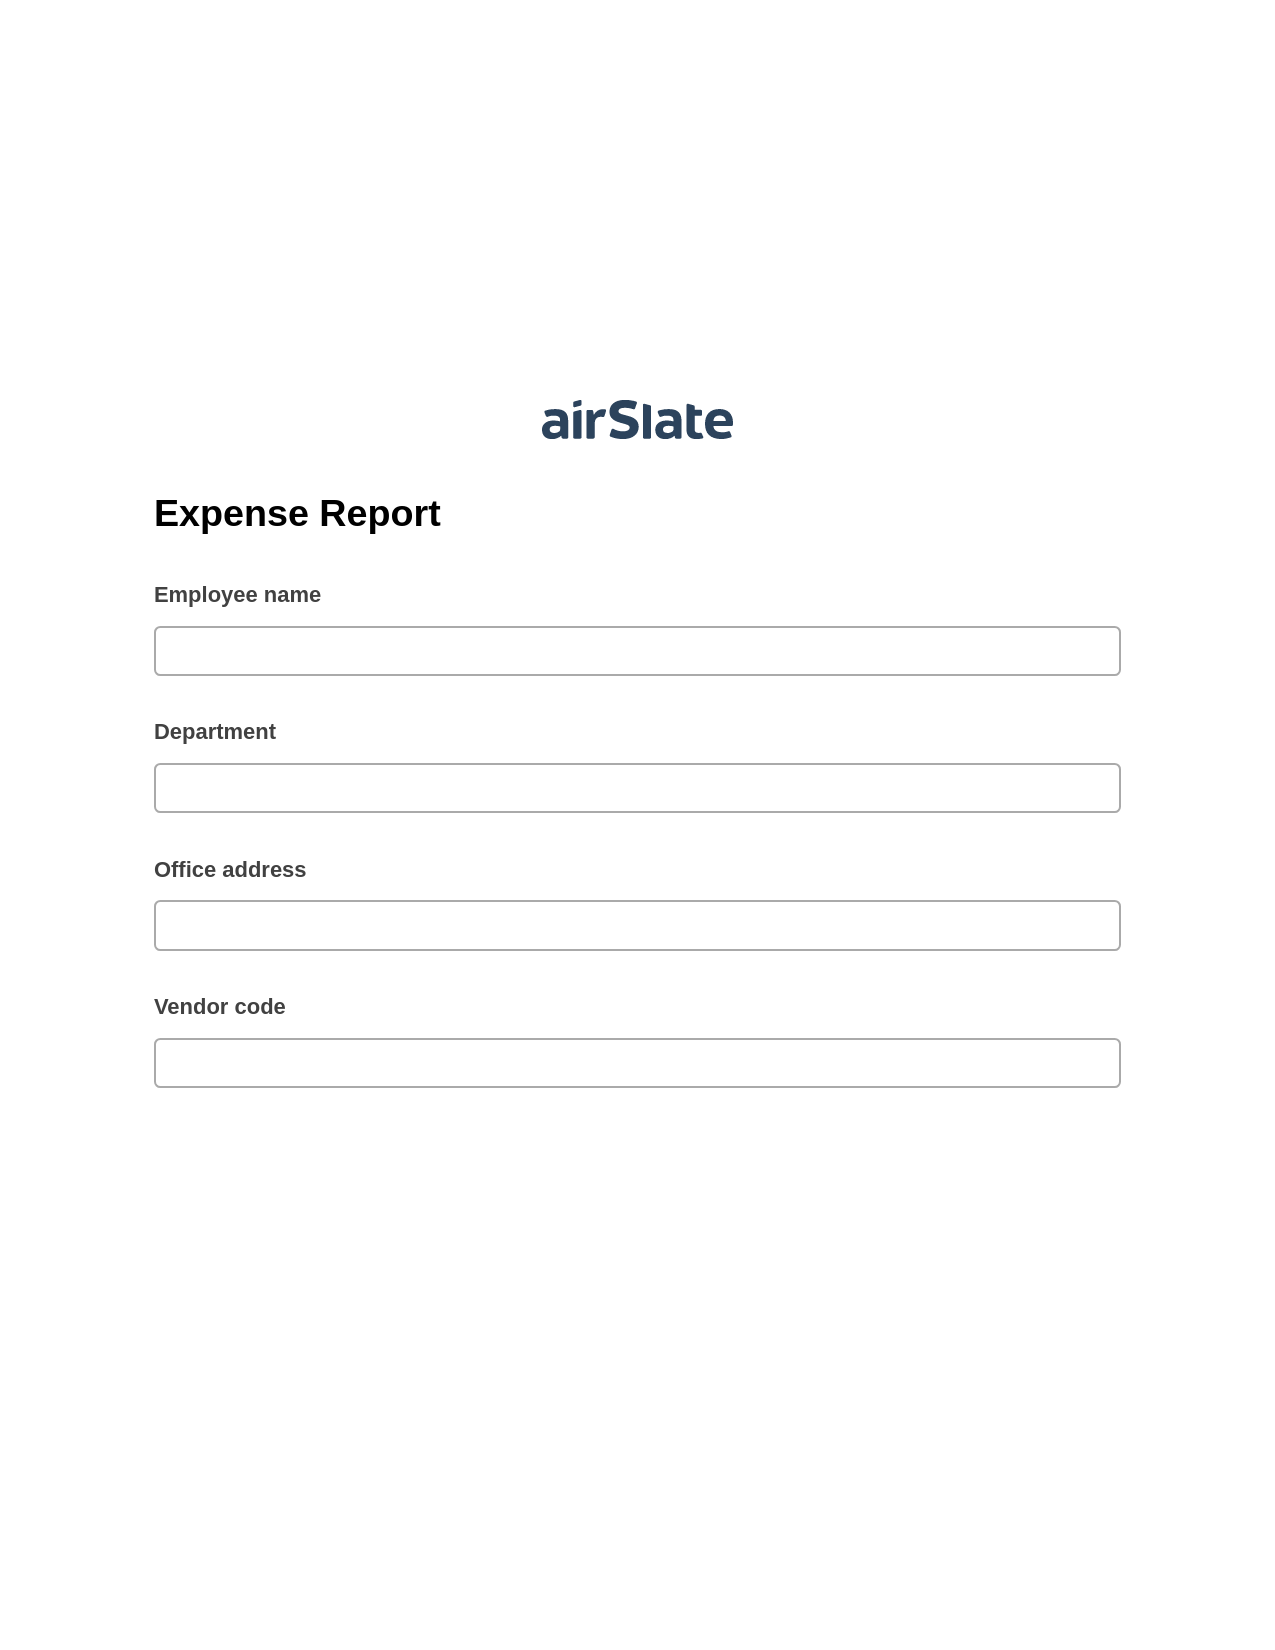 Multirole Expense Report Pre-fill from Salesforce Record Bot, Google Calendar Bot, Export to Excel 365 Bot